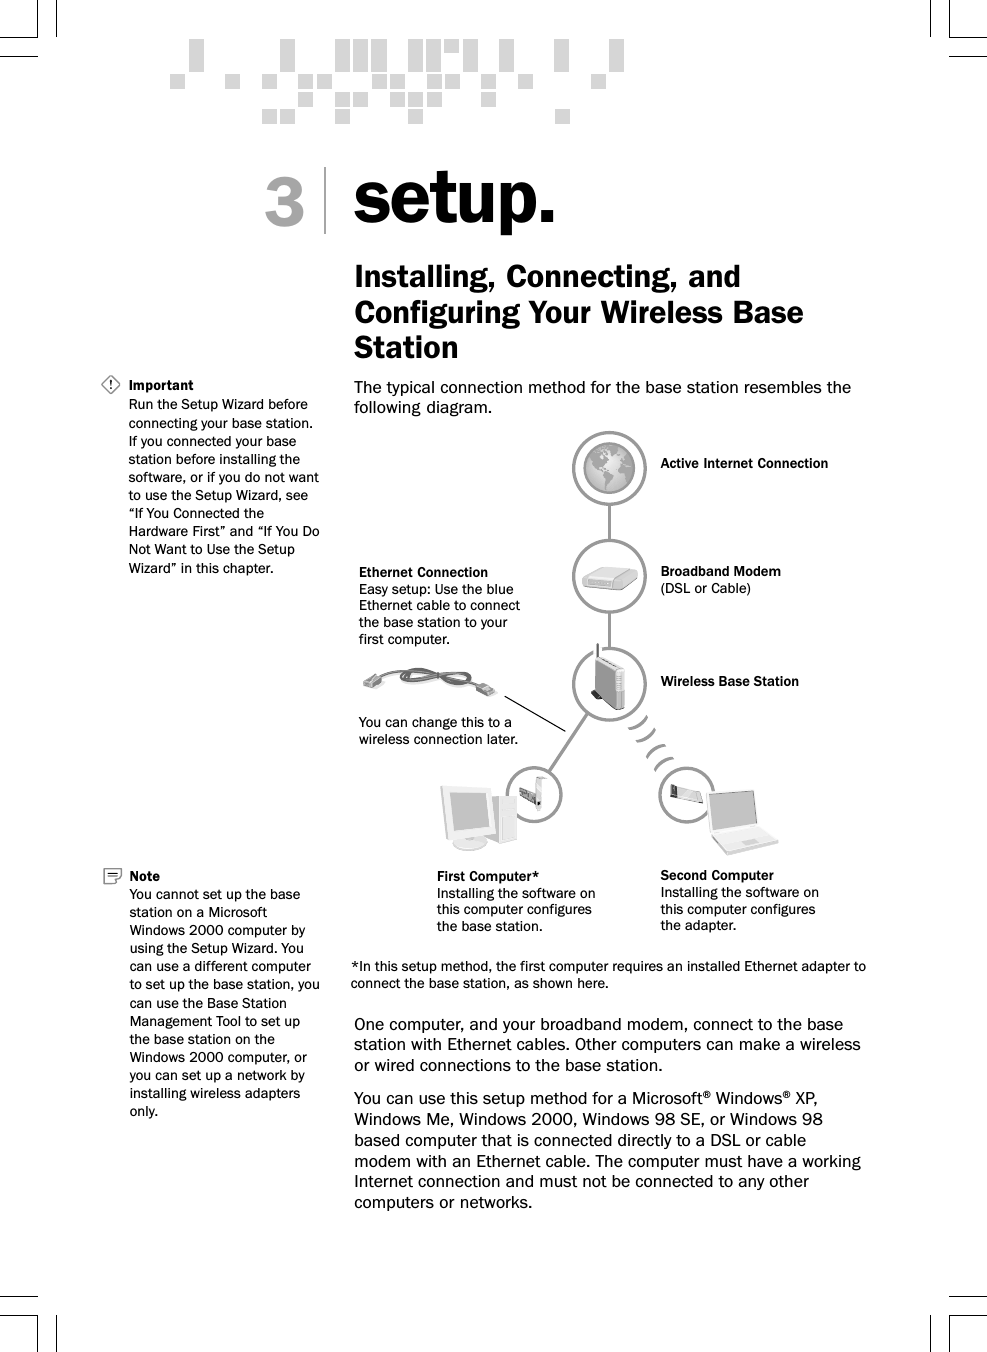 setup.Installing, Connecting, andConfiguring Your Wireless BaseStationThe typical connection method for the base station resembles thefollowing diagram.One computer, and your broadband modem, connect to the basestation with Ethernet cables. Other computers can make a wirelessor wired connections to the base station.You can use this setup method for a Microsoft® Windows® XP,Windows Me, Windows 2000, Windows 98 SE, or Windows 98based computer that is connected directly to a DSL or cablemodem with an Ethernet cable. The computer must have a workingInternet connection and must not be connected to any othercomputers or networks.3Important   Run the Setup Wizard beforeconnecting your base station.If you connected your basestation before installing thesoftware, or if you do not wantto use the Setup Wizard, see“If You Connected theHardware First” and “If You DoNot Want to Use the SetupWizard” in this chapter.Active Internet ConnectionBroadband Modem(DSL or Cable)Second ComputerInstalling the software onthis computer configuresthe adapter.First Computer*Installing the software onthis computer configuresthe base station.Wireless Base StationEthernet ConnectionEasy setup: Use the blueEthernet cable to connectthe base station to yourfirst computer.You can change this to awireless connection later.*In this setup method, the first computer requires an installed Ethernet adapter toconnect the base station, as shown here.NoteYou cannot set up the basestation on a MicrosoftWindows 2000 computer byusing the Setup Wizard. Youcan use a different computerto set up the base station, youcan use the Base StationManagement Tool to set upthe base station on theWindows 2000 computer, oryou can set up a network byinstalling wireless adaptersonly.